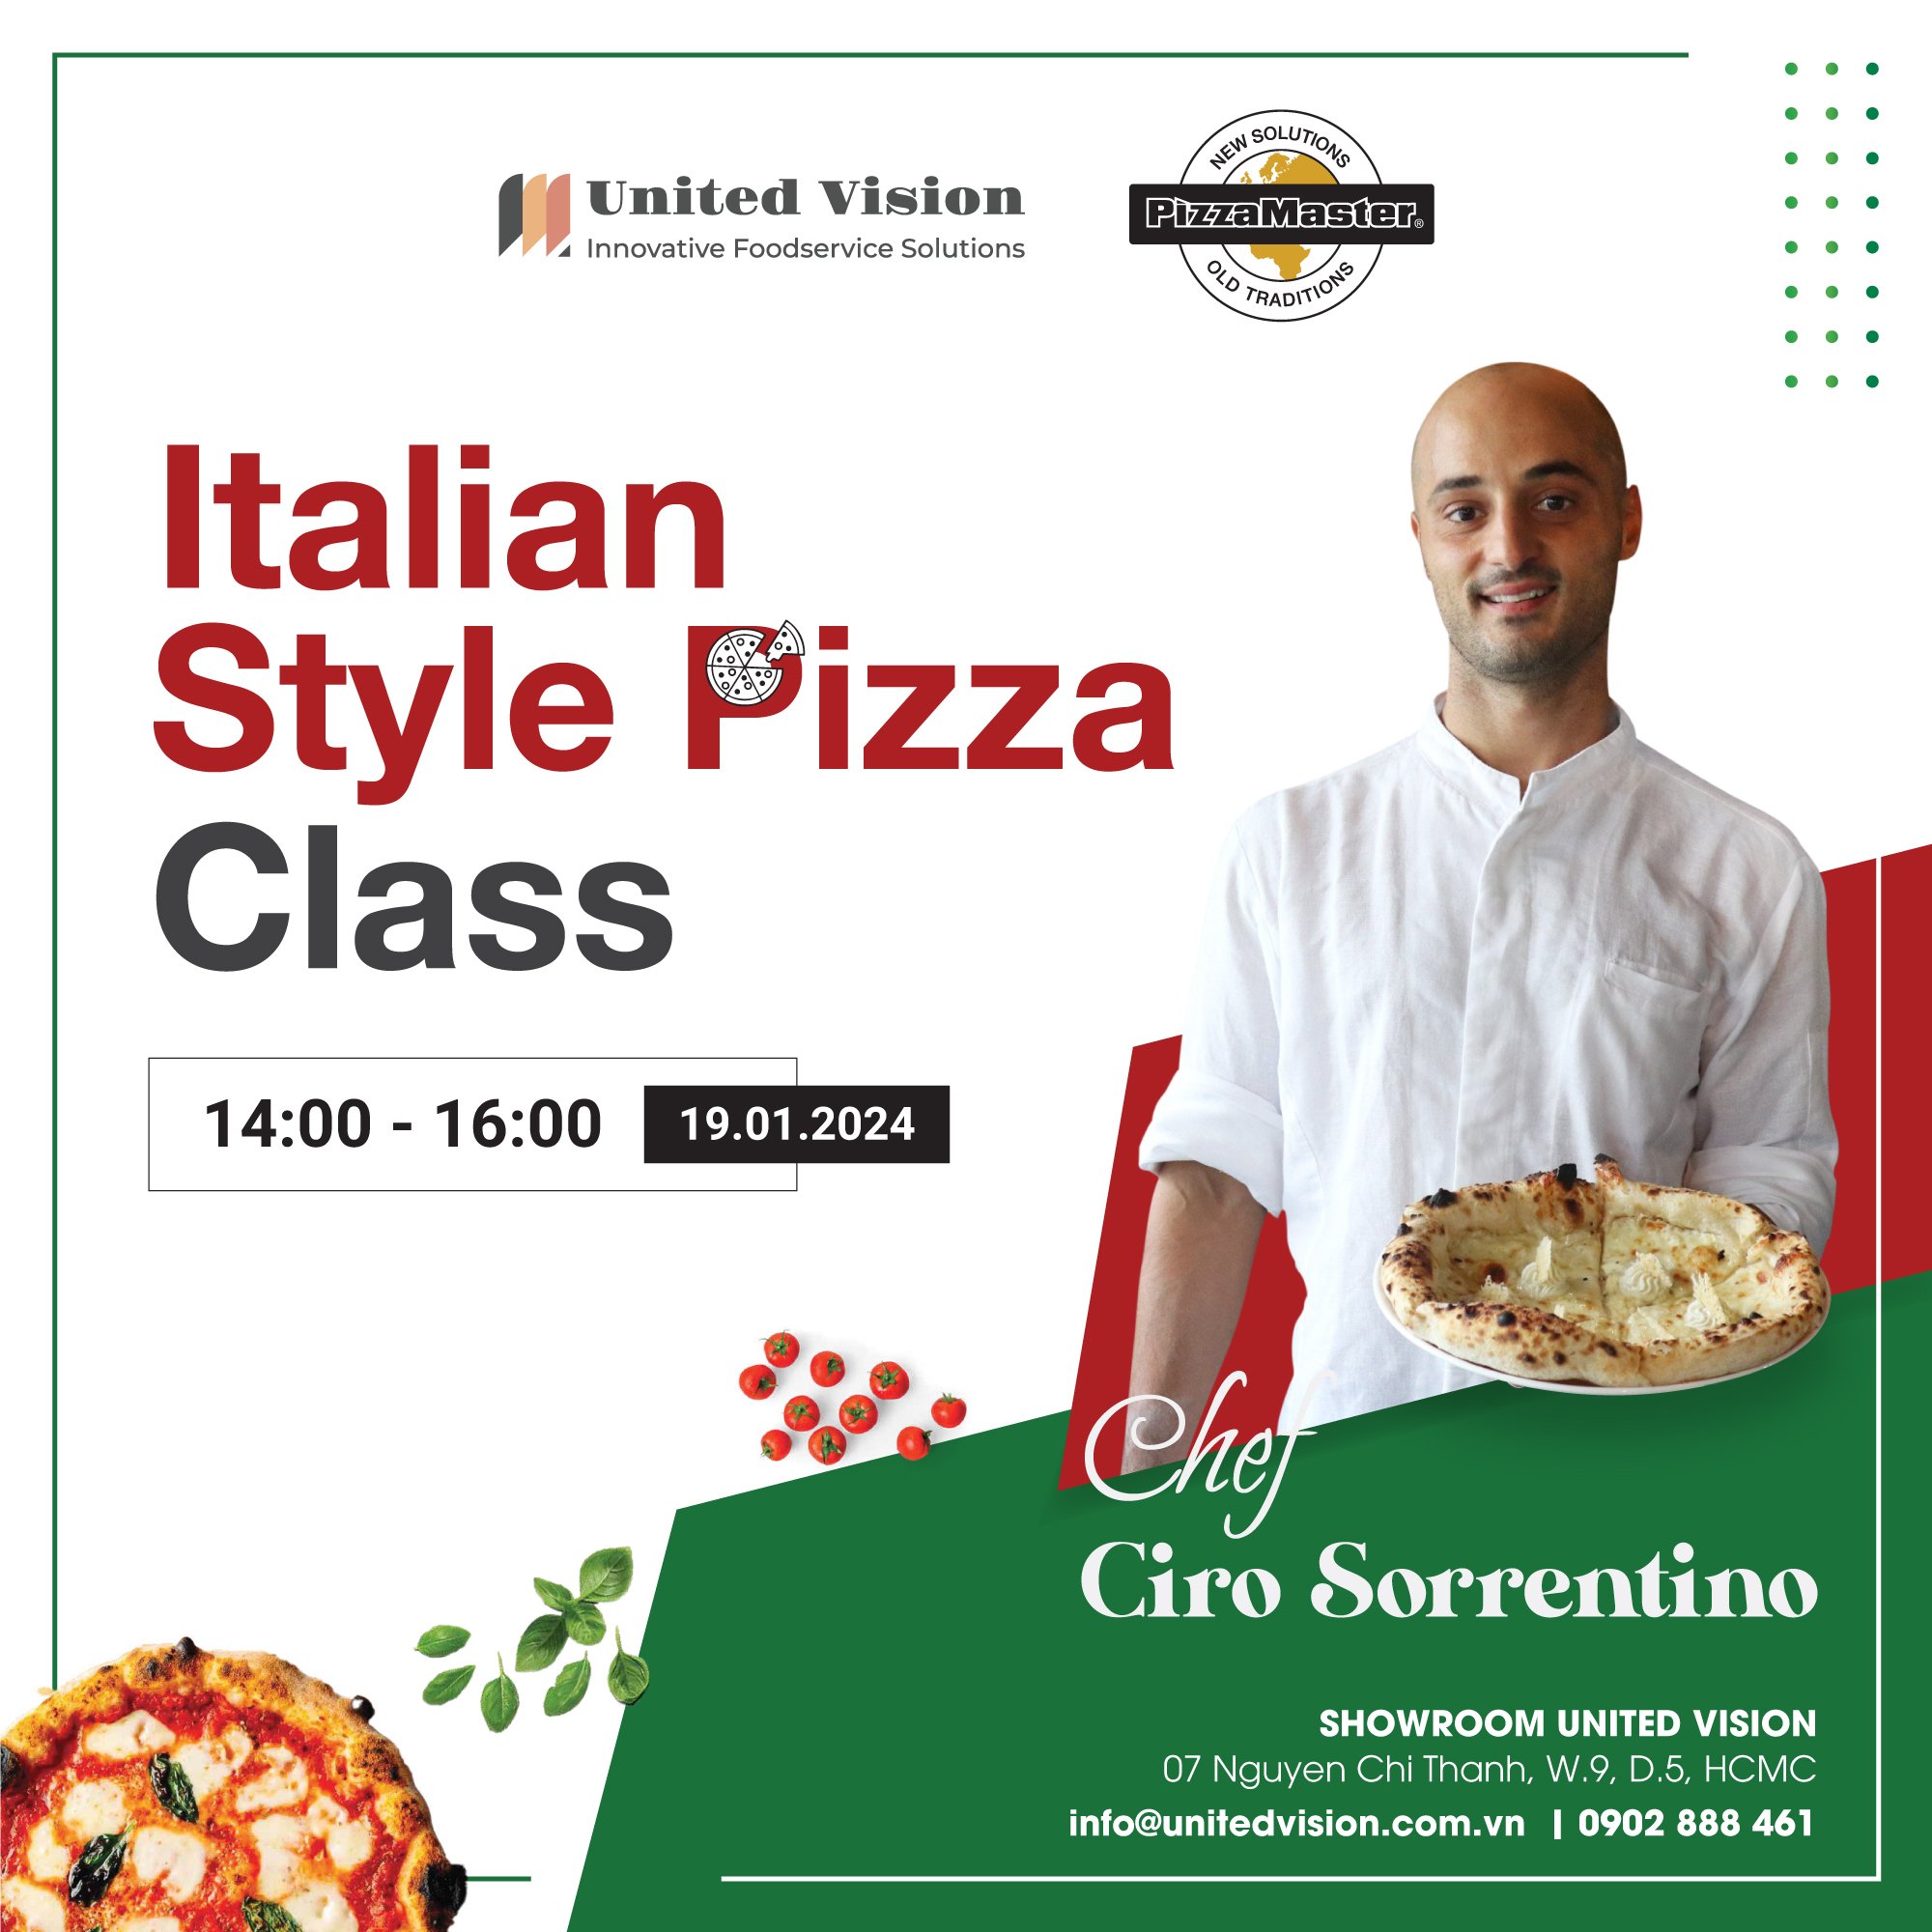 Italian Style Pizza Class With Chef Ciro Sorrentino | Interesting Event For Pizza Lovers